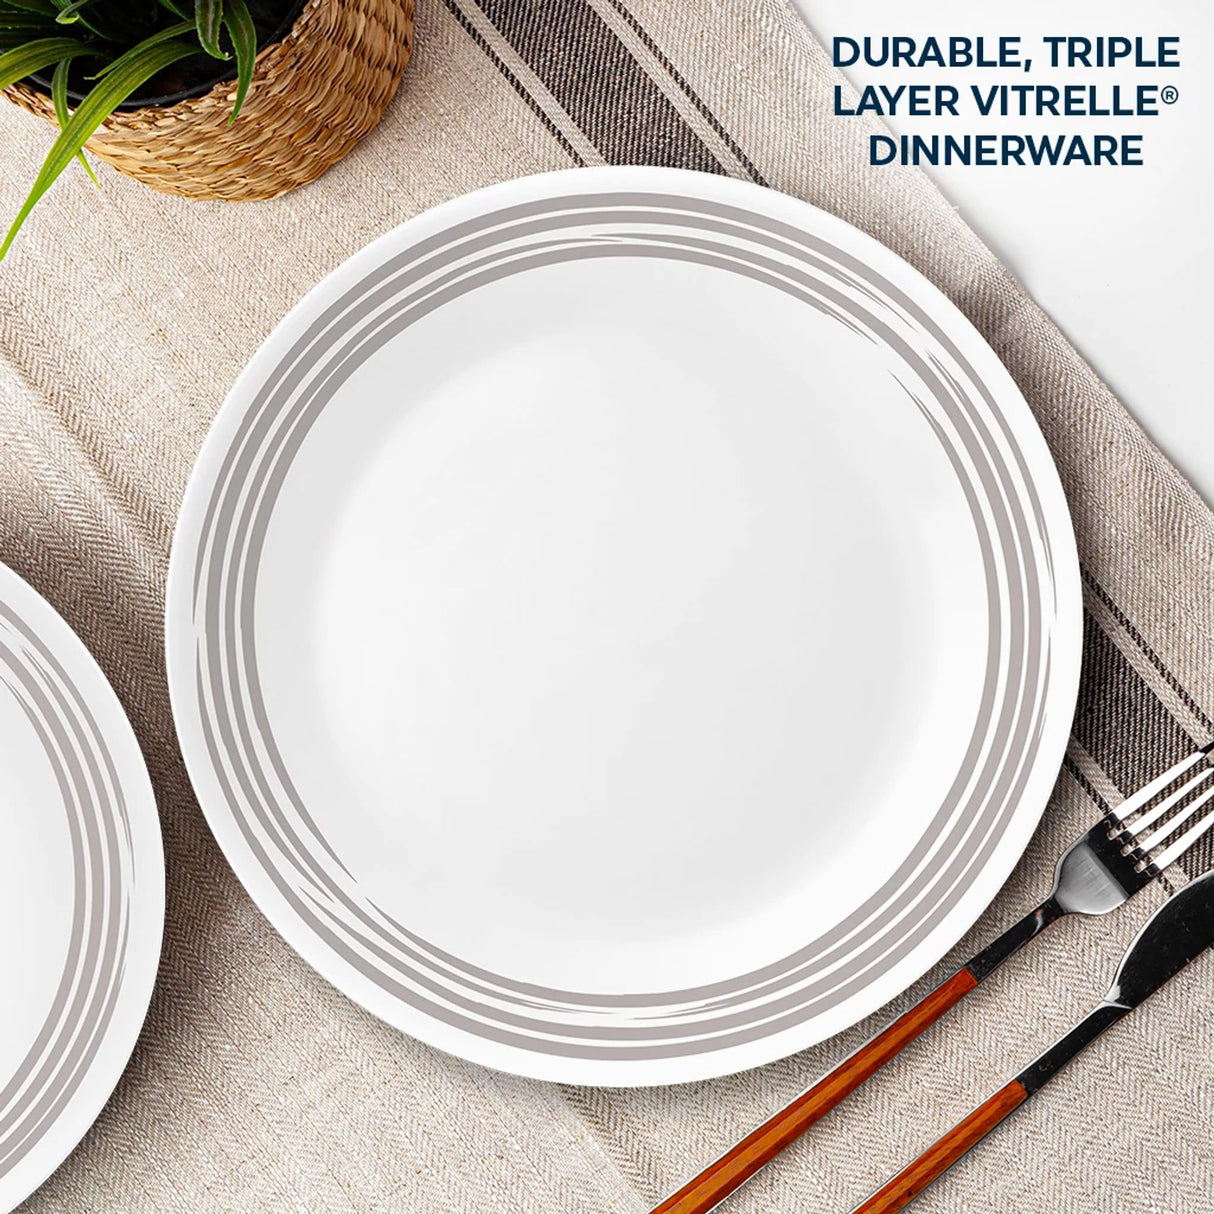  Brushed Silver Dinner plate with text:durable,triple,layer vitrelle dinnerware